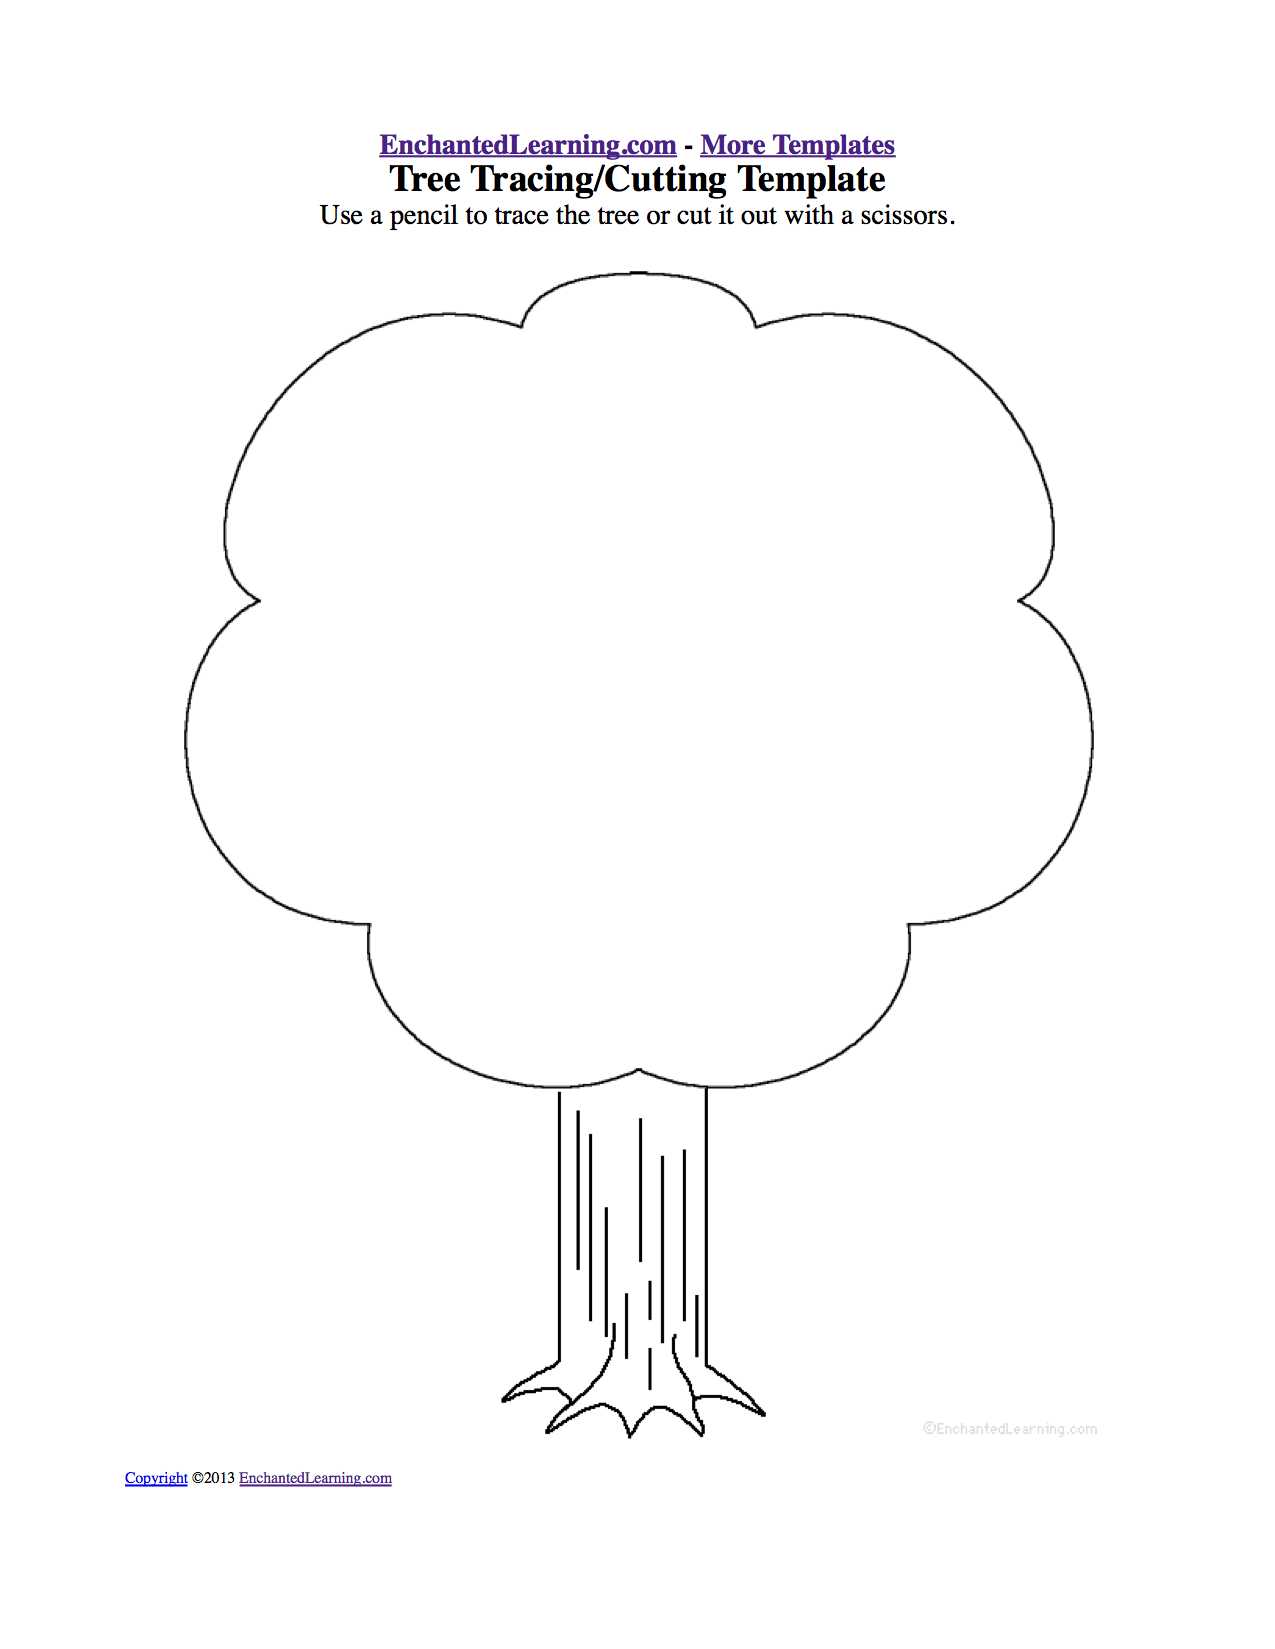 Tree Ring Activity Worksheet Answers or Counting Trees Math Worksheet Answers